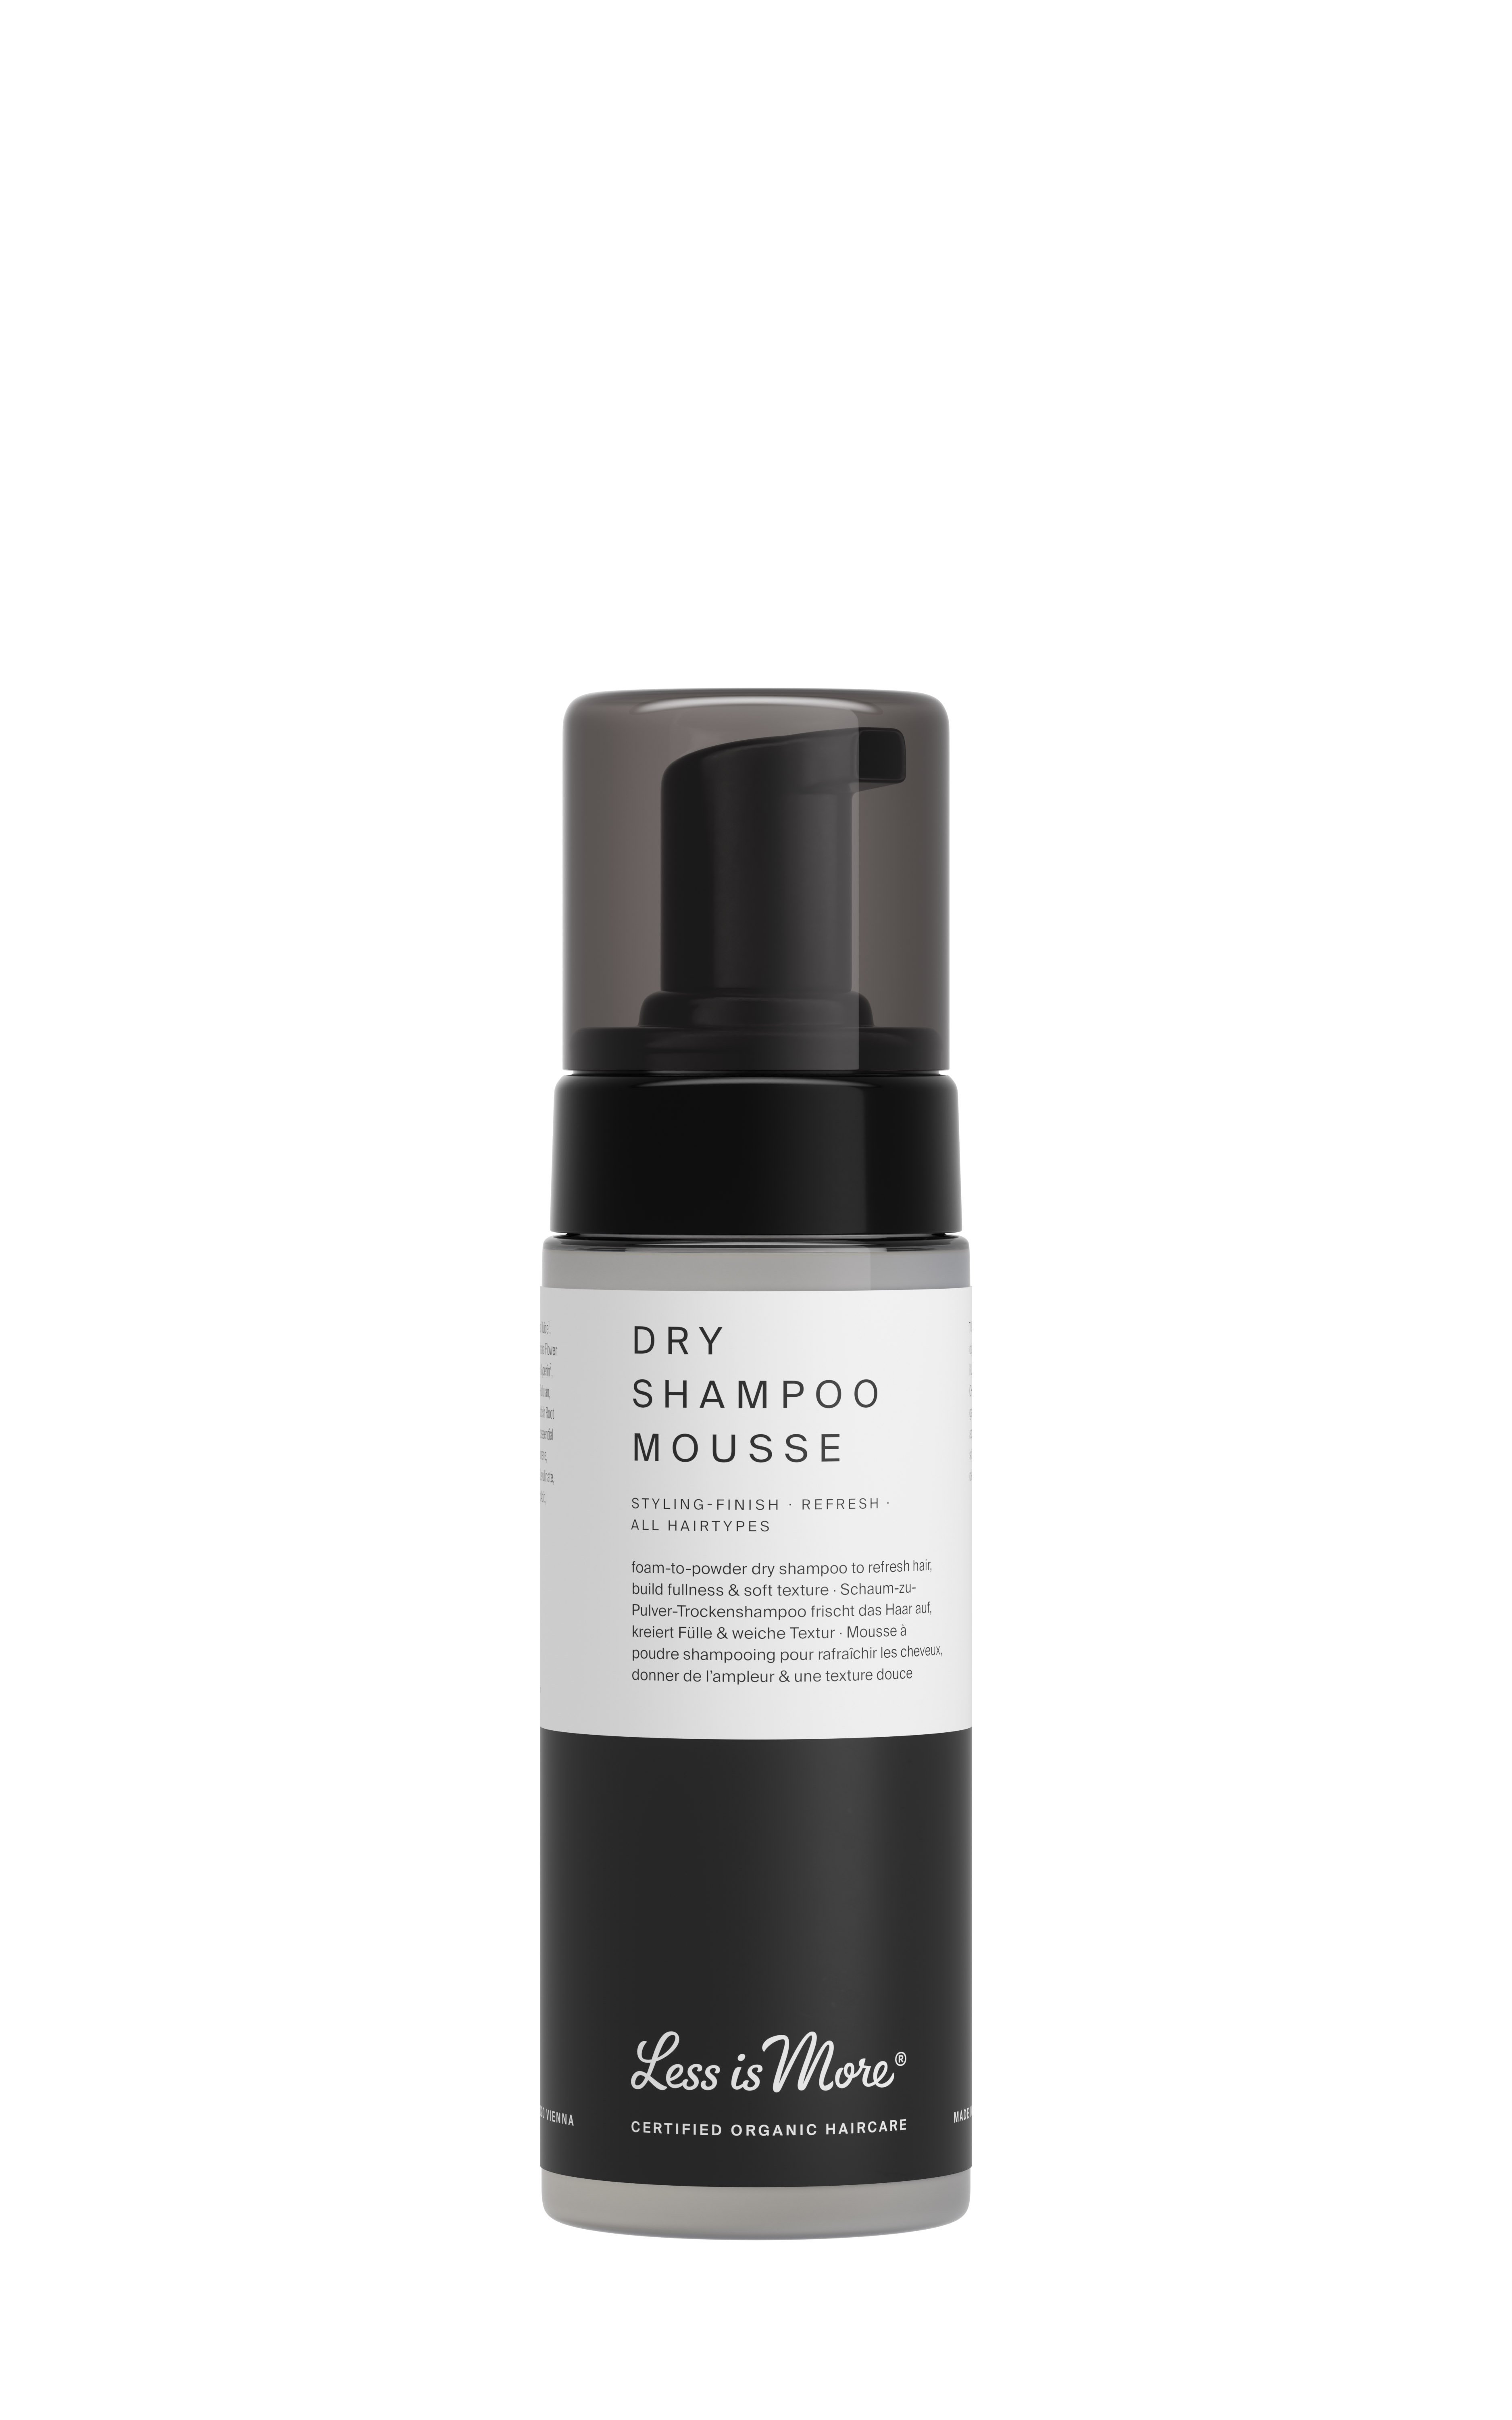 Dry Shampoo Mousse 150 ml from Less is More